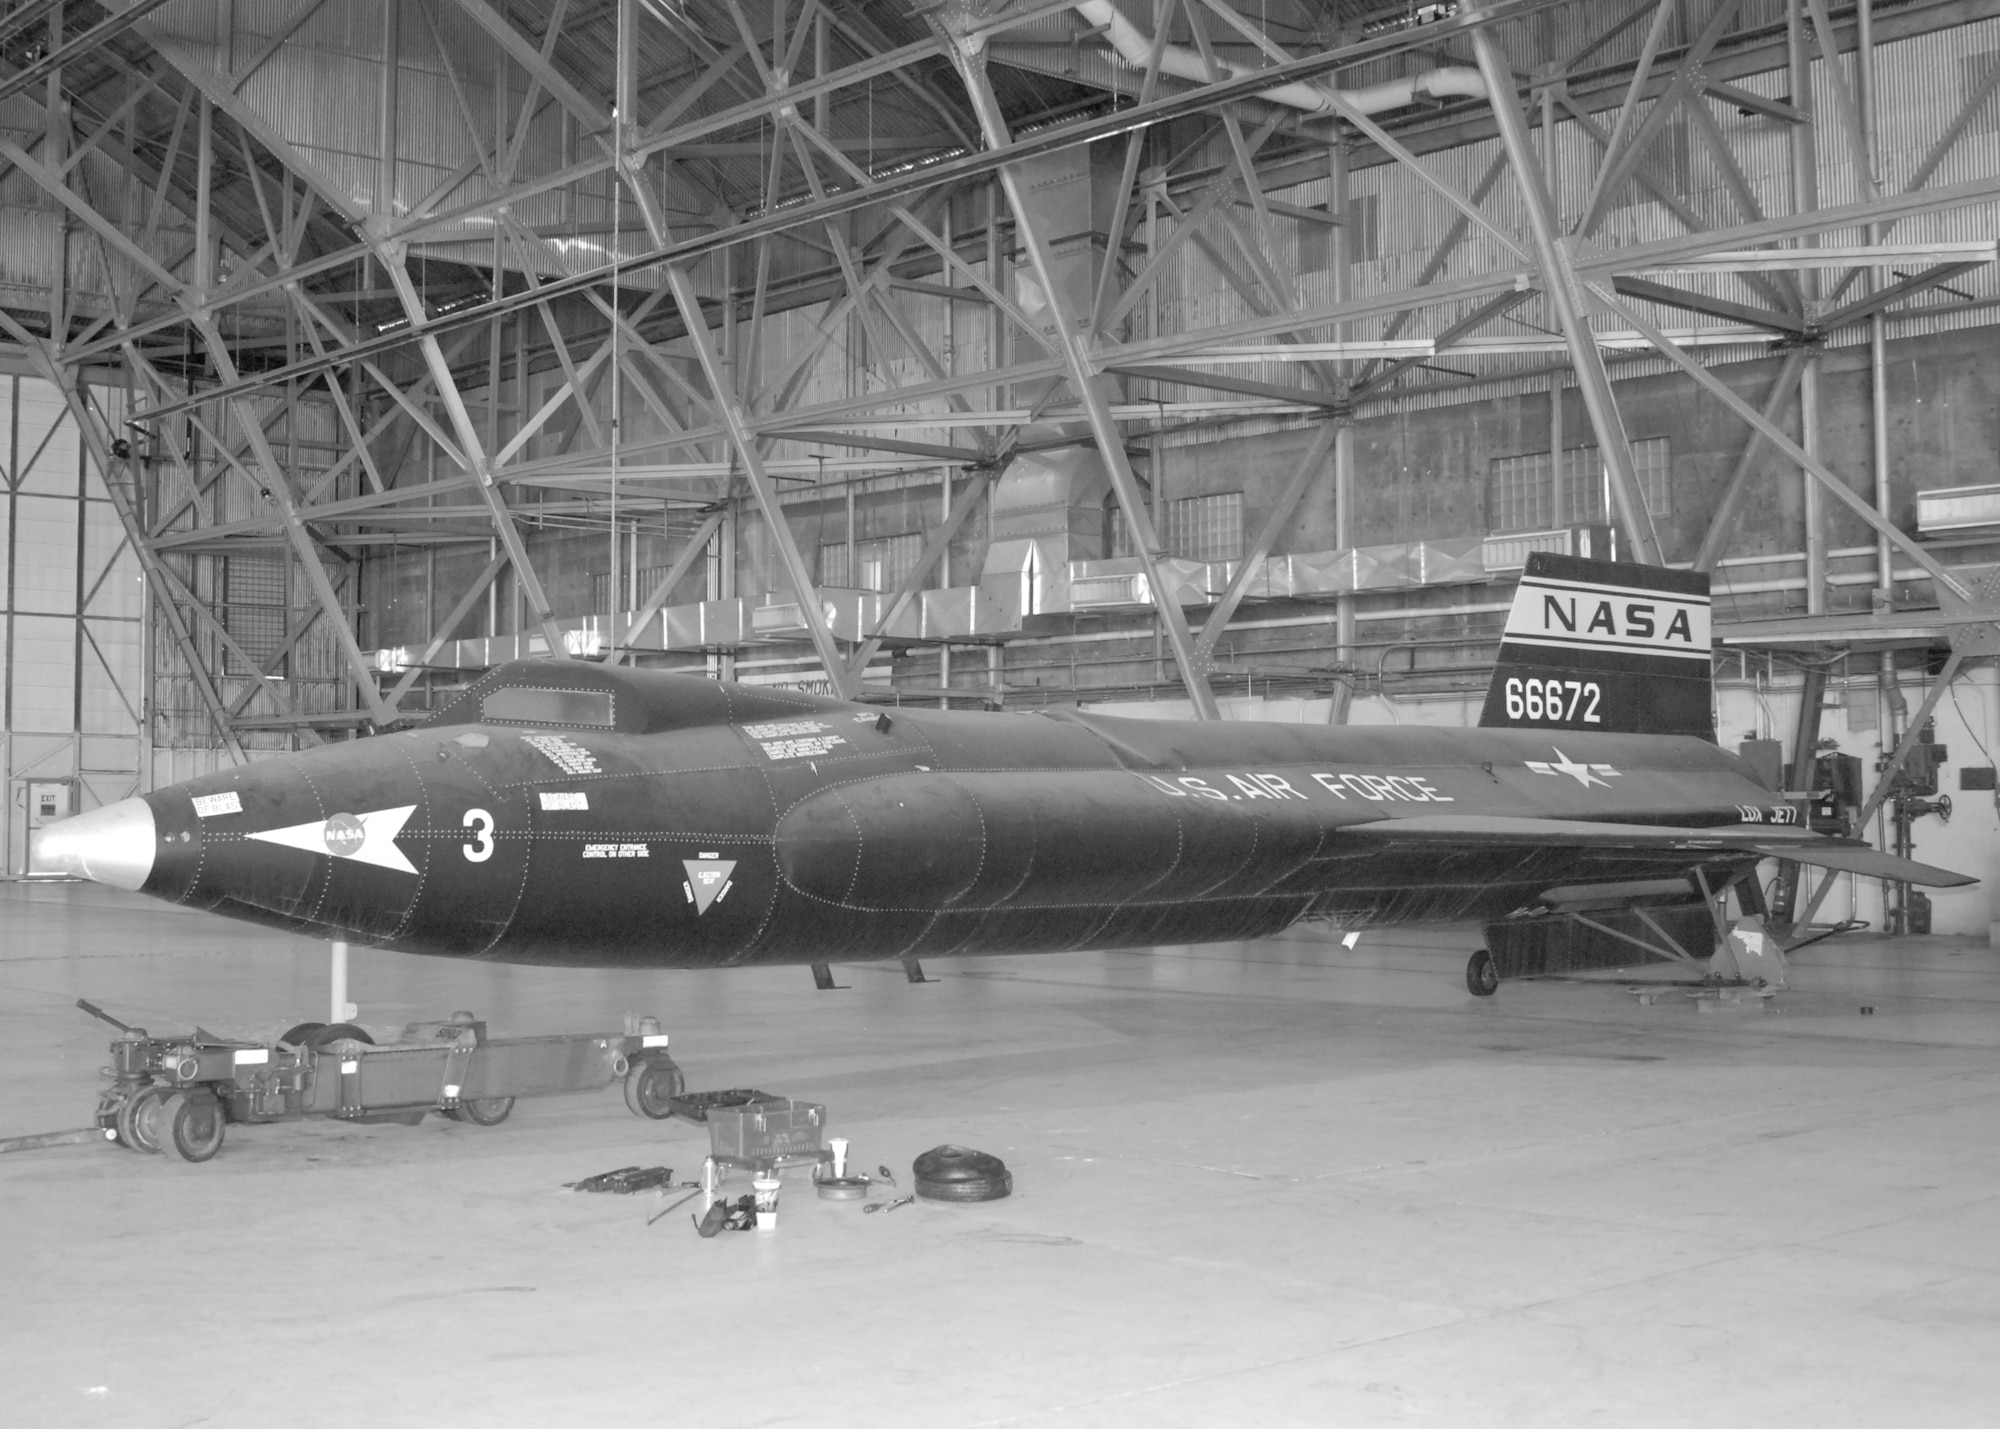 Restoration of the full-scale X-15 mockup will continue at Hangar 1864. (U.S. Air Force Photo by Laura Mowry)